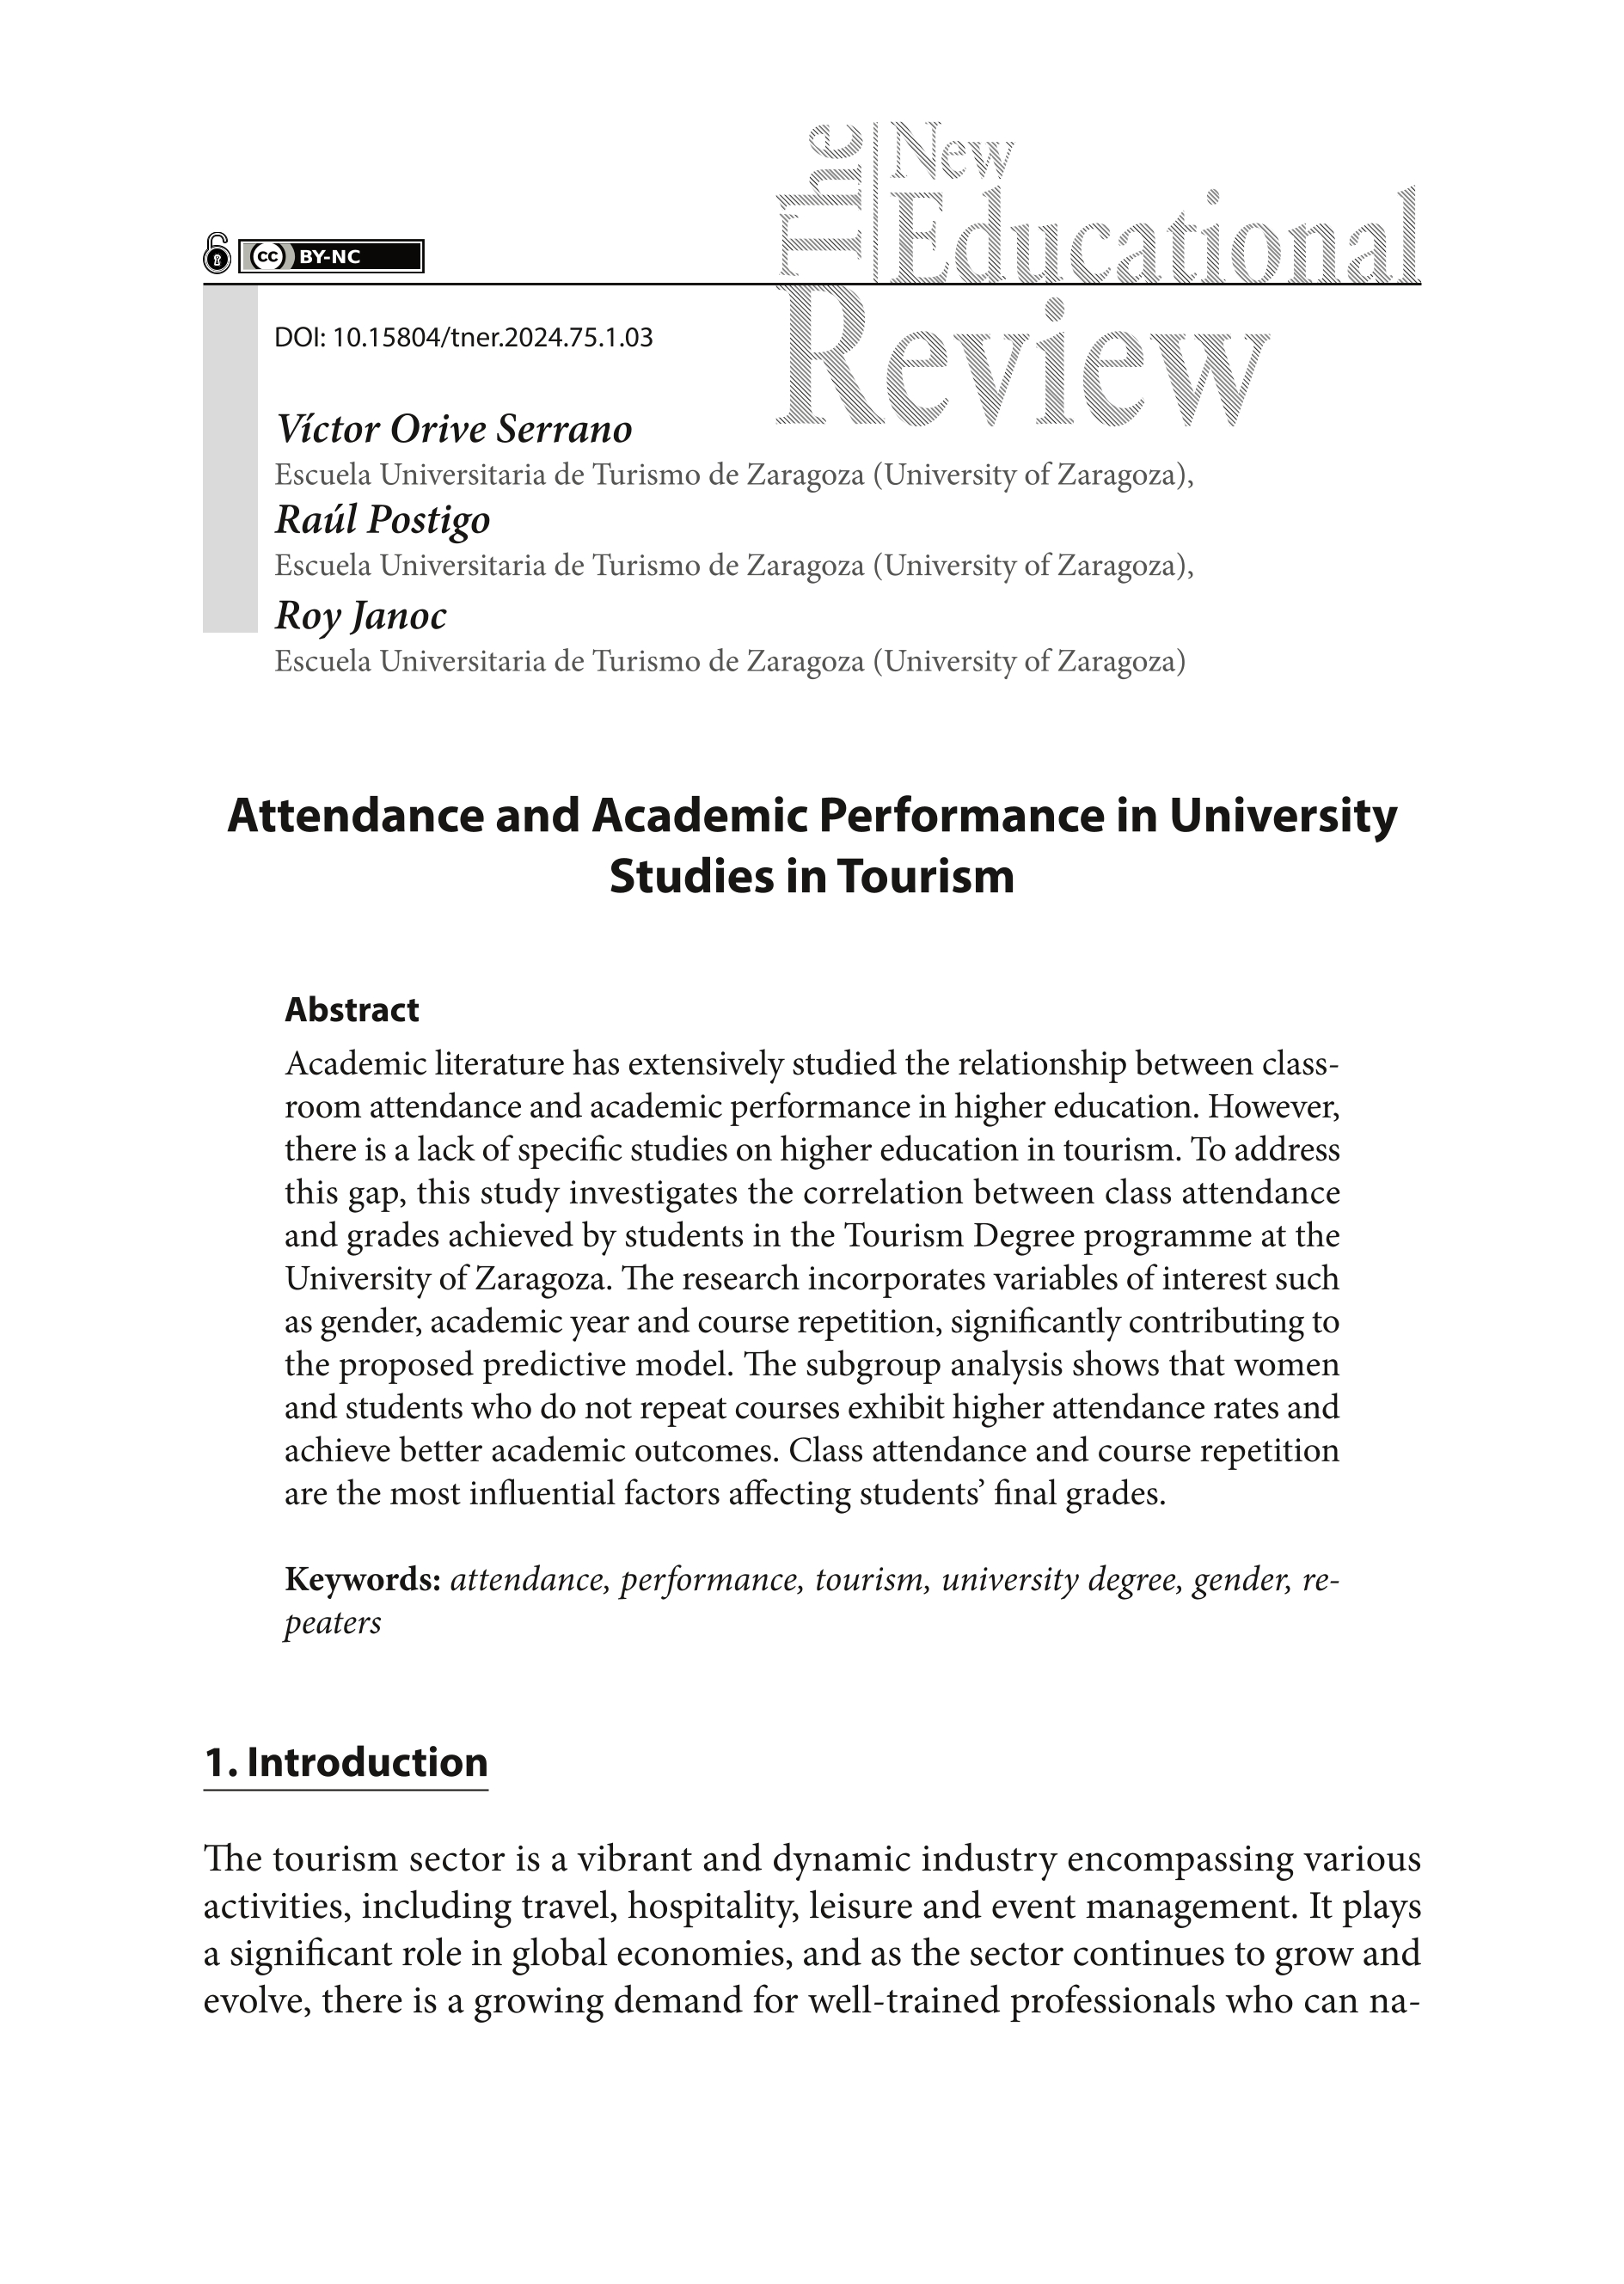 Attendance and Academic Performance in University Studies in Tourism